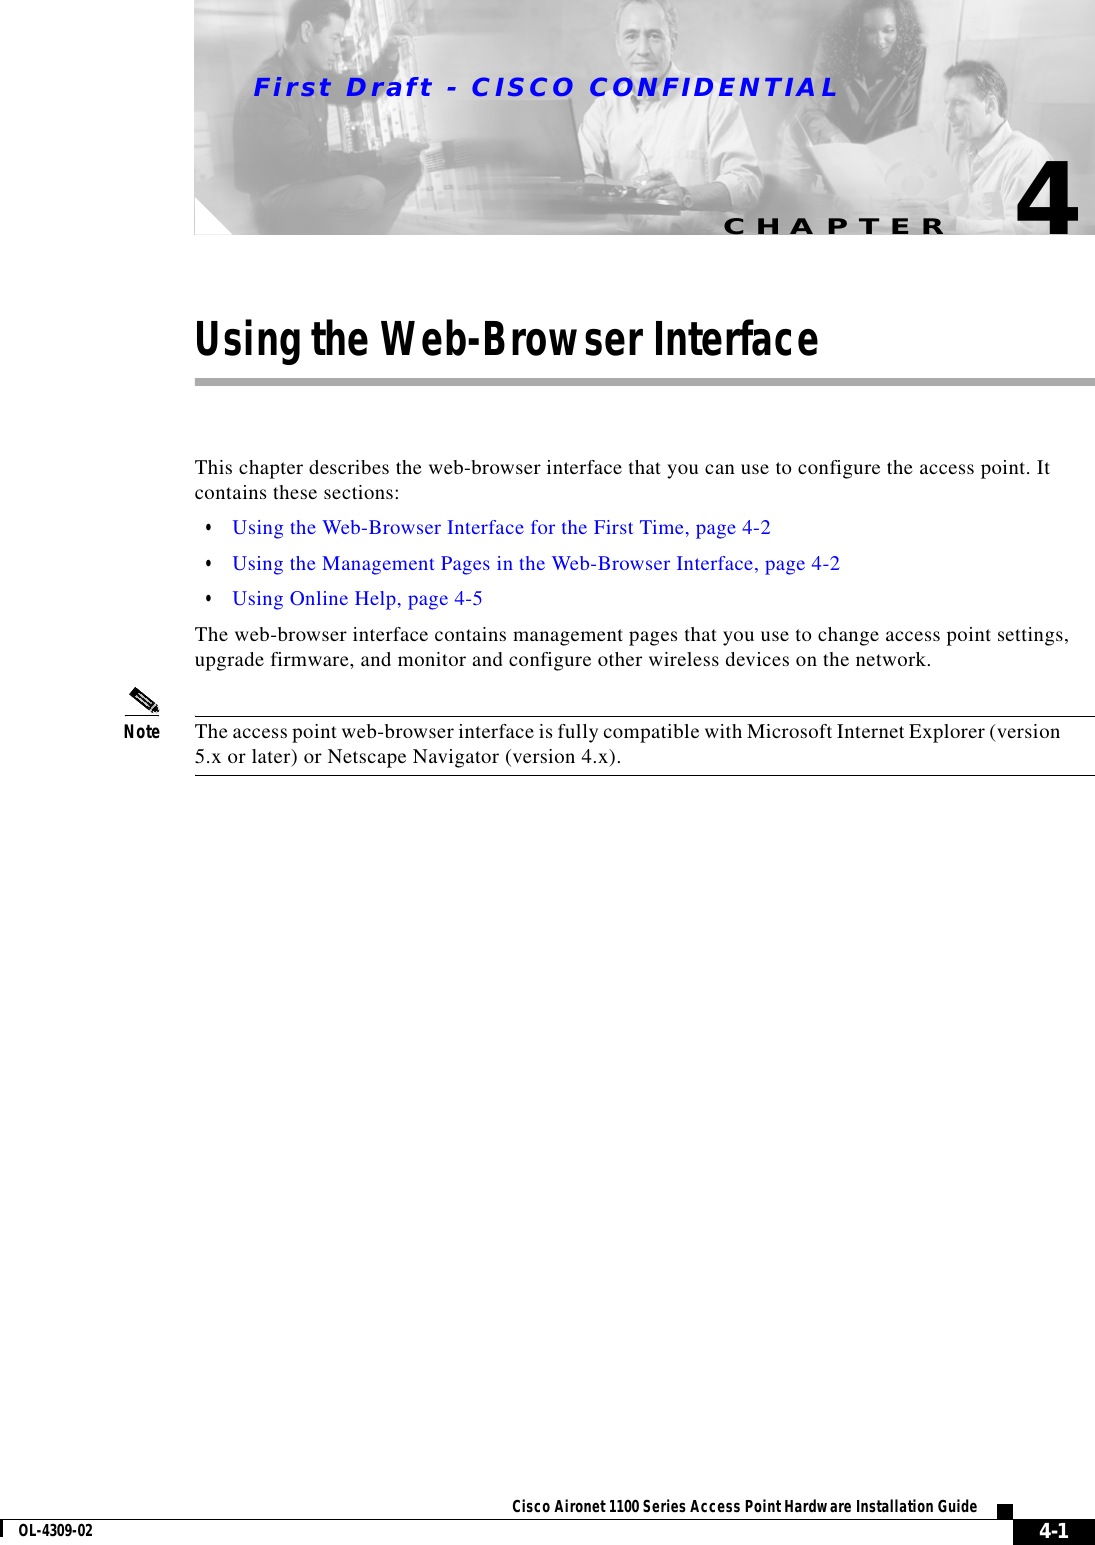 CHAPTERFirst Draft - CISCO CONFIDENTIAL4-1Cisco Aironet 1100 Series Access Point Hardware Installation GuideOL-4309-024Using the Web-Browser InterfaceThis chapter describes the web-browser interface that you can use to configure the access point. It contains these sections:•Using the Web-Browser Interface for the First Time, page 4-2•Using the Management Pages in the Web-Browser Interface, page 4-2•Using Online Help, page 4-5The web-browser interface contains management pages that you use to change access point settings, upgrade firmware, and monitor and configure other wireless devices on the network.Note The access point web-browser interface is fully compatible with Microsoft Internet Explorer (version 5.x or later) or Netscape Navigator (version 4.x).